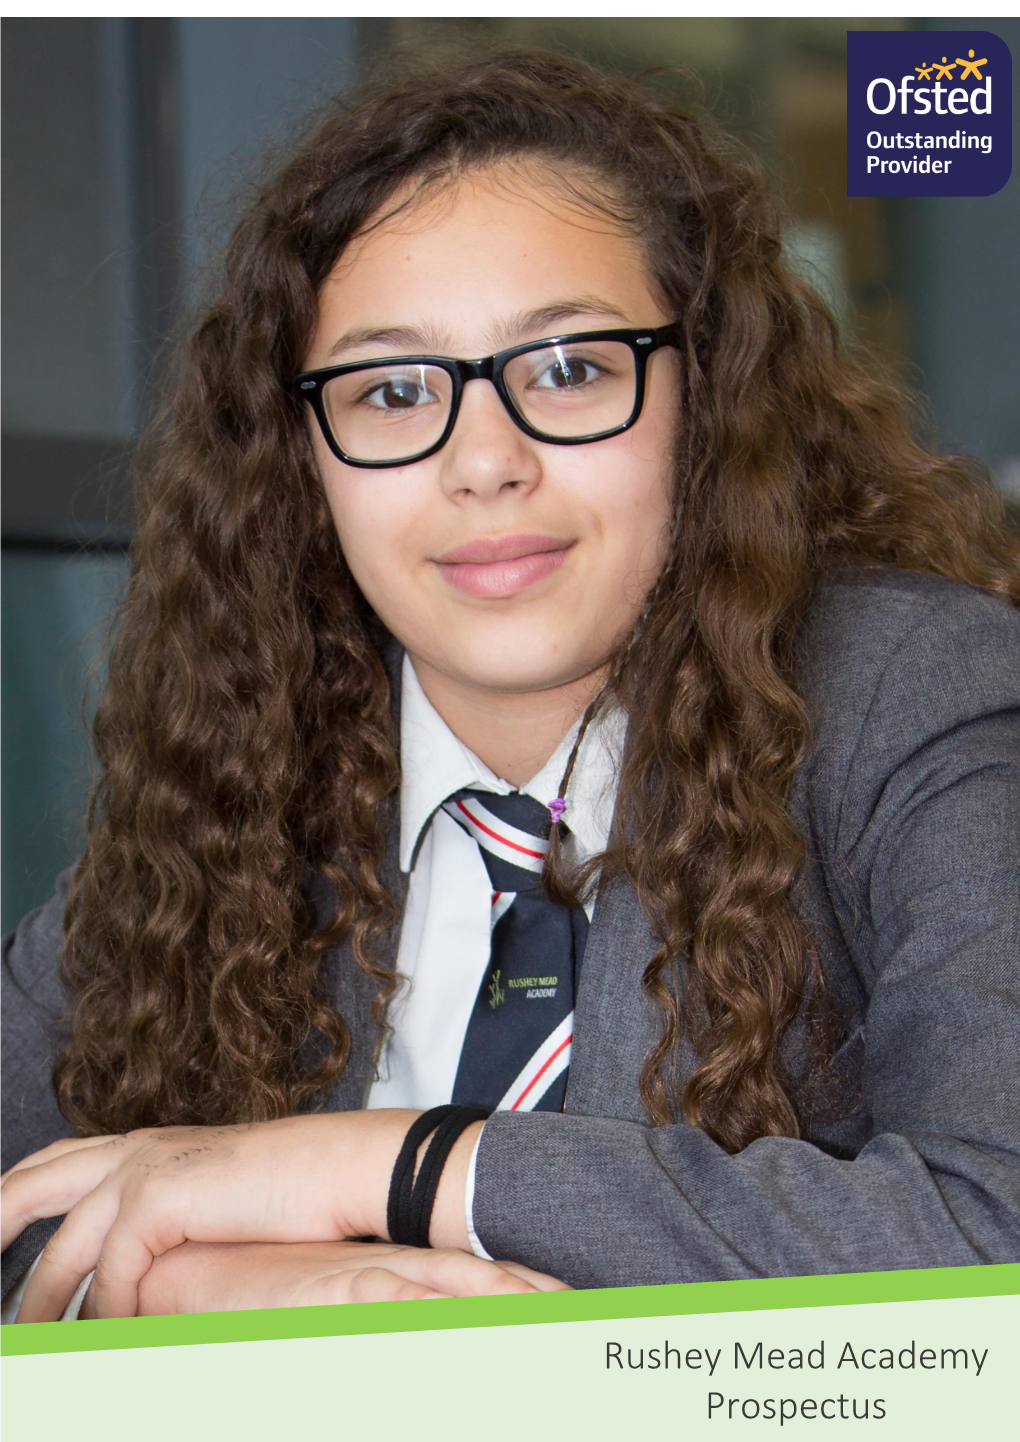 Rushey Mead Academy Prospectus Welcome Rushey Mead Academy Is a Vibrant and Highly Successful School Which Serves Communities in the North of Leicester